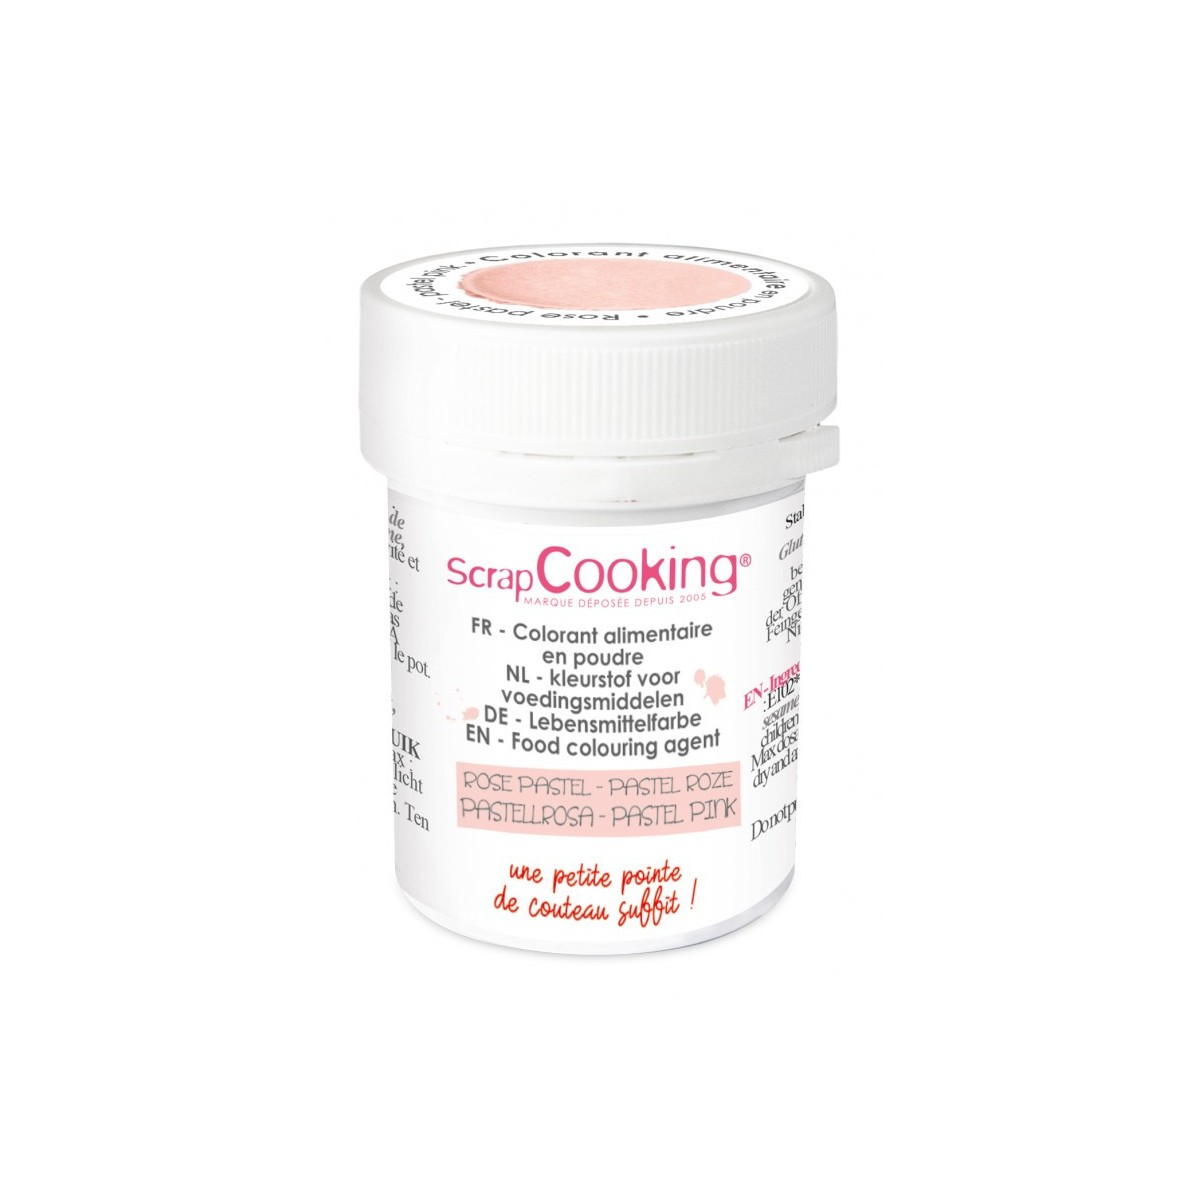 SCRAPCOOKING COLORANT ALIMENTAIRE HYDRO ROSE PASTEL 5GR